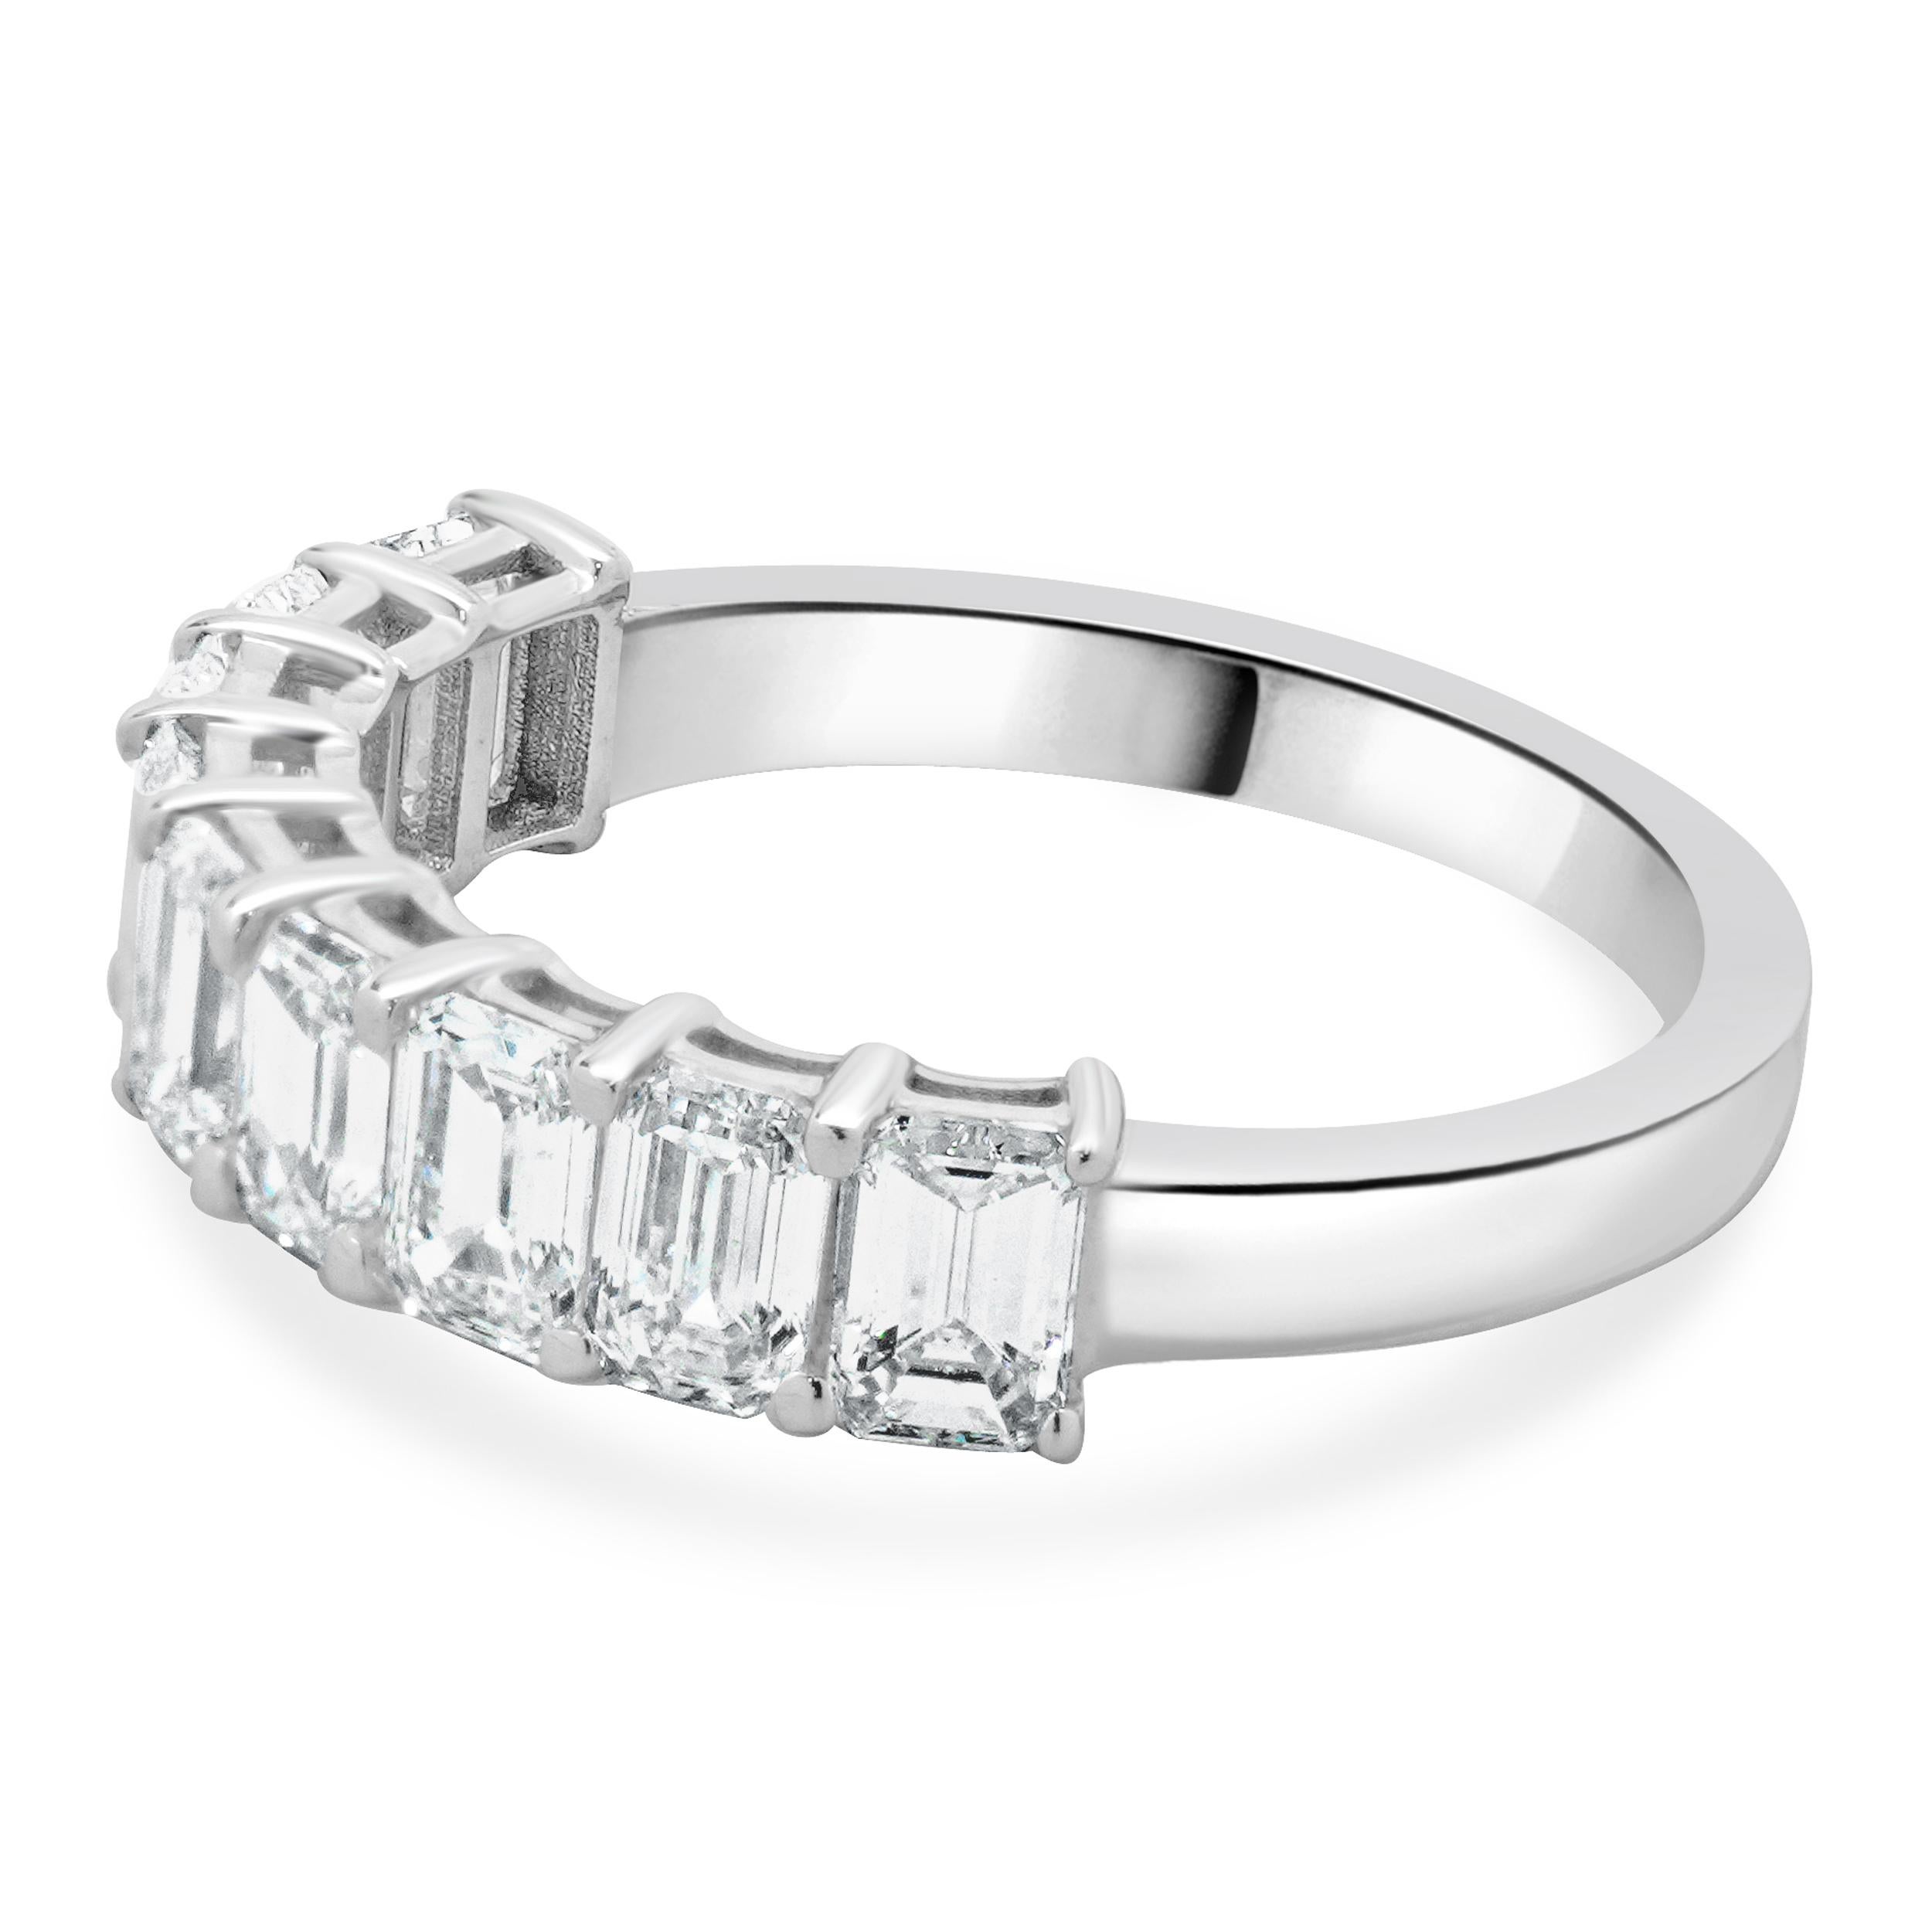 Designer: custom
Material: 14K white gold
Diamond: 9 emerald cut = 2.25cttw
Color: G
Clarity: VS-SI1
Ring size: 6.5 (please allow two additional shipping days for sizing requests)
Weight: 3.08 grams
